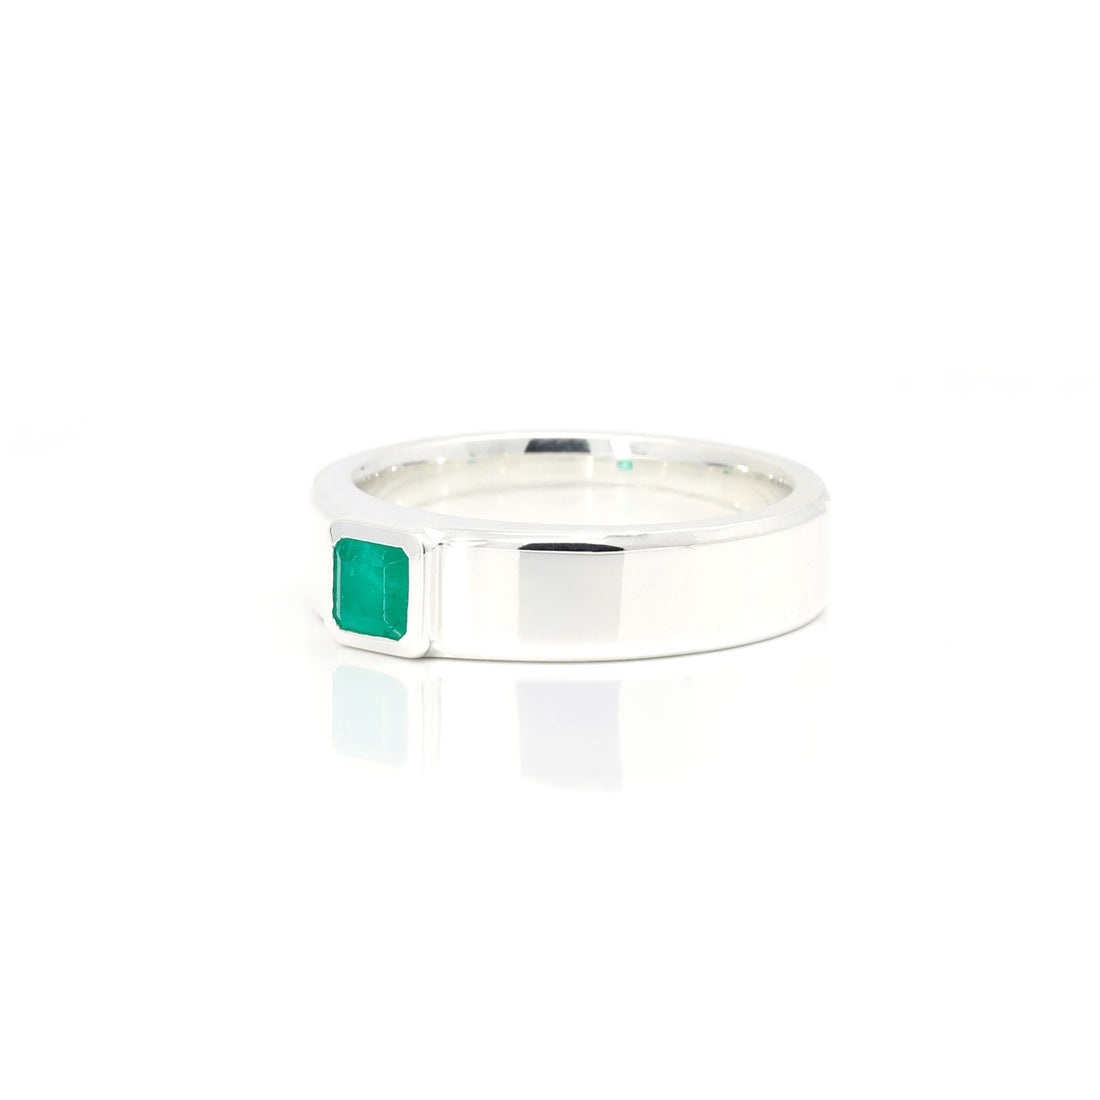 square shape emerald bezel setting silver bena jewelry ring made in montreal